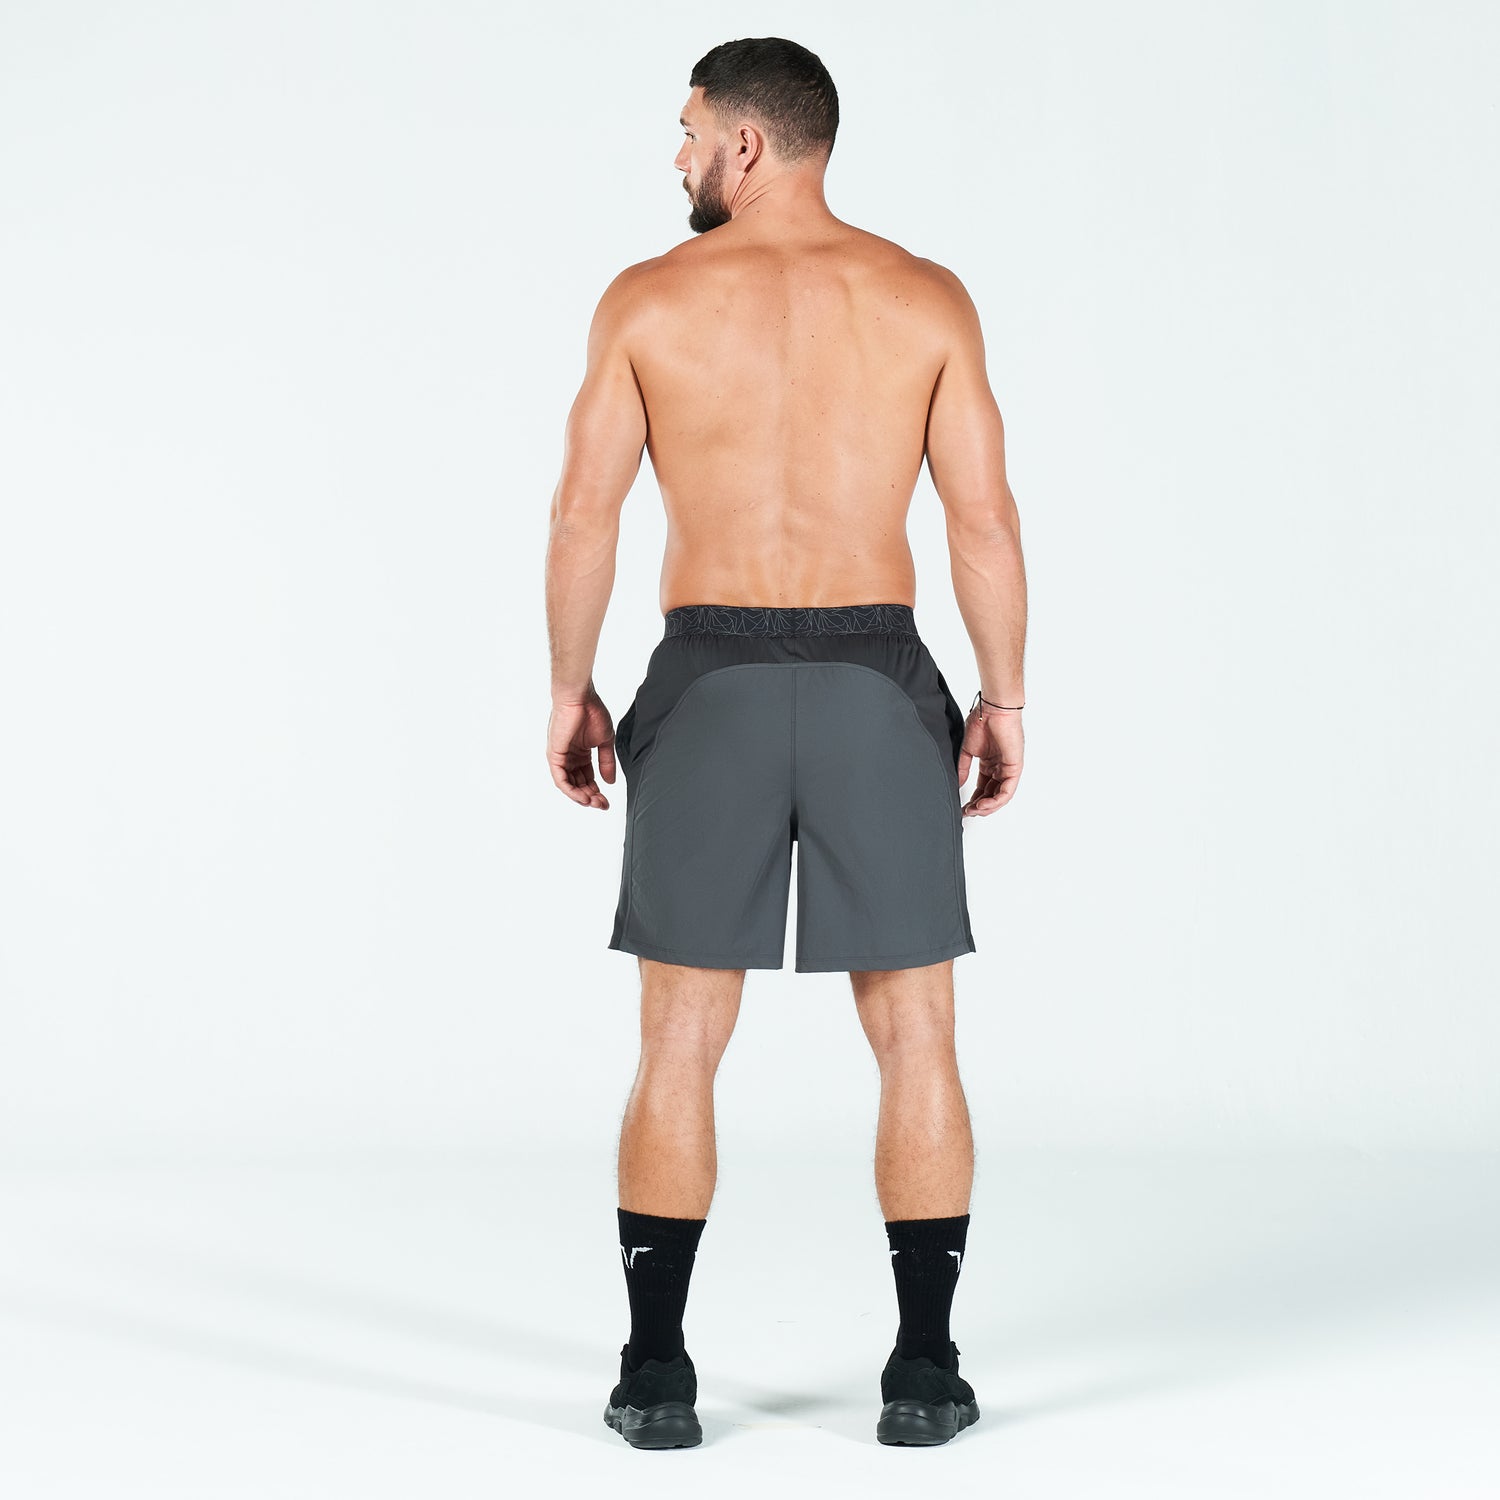 squatwolf-gym-wear-core-7-aerotech-shorts-charcoal-workout-short-for-men